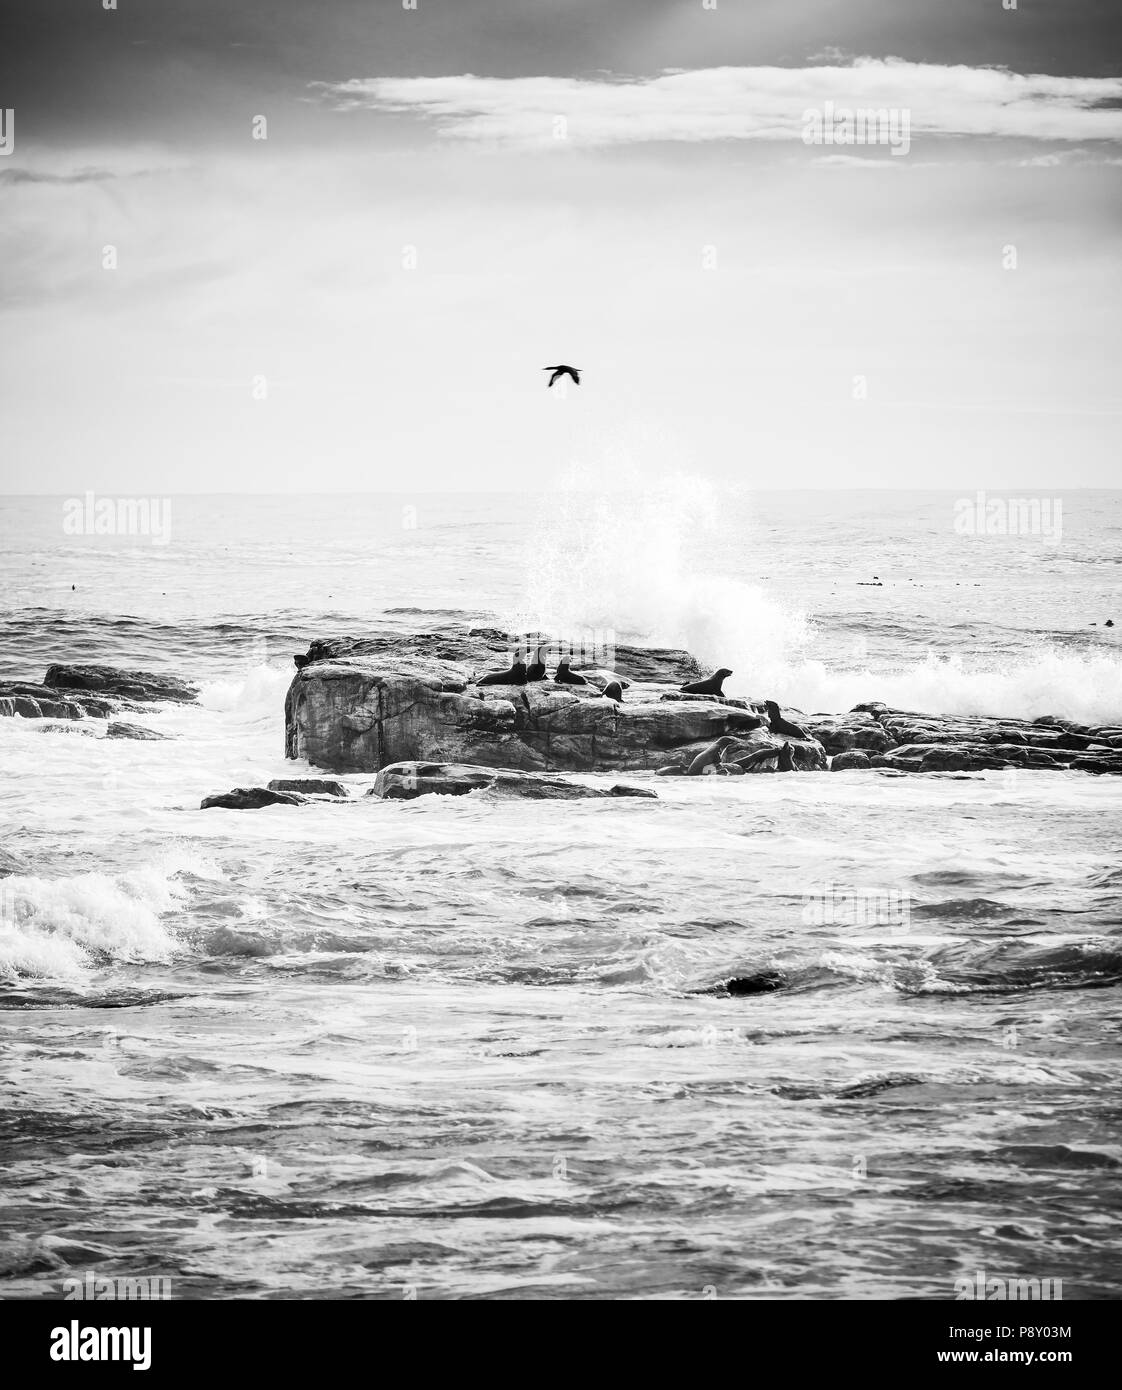 Seabirds and brown fur seals on island off the Cape of Good Hope, Cape Peninsula, South Africa in black and white Stock Photo